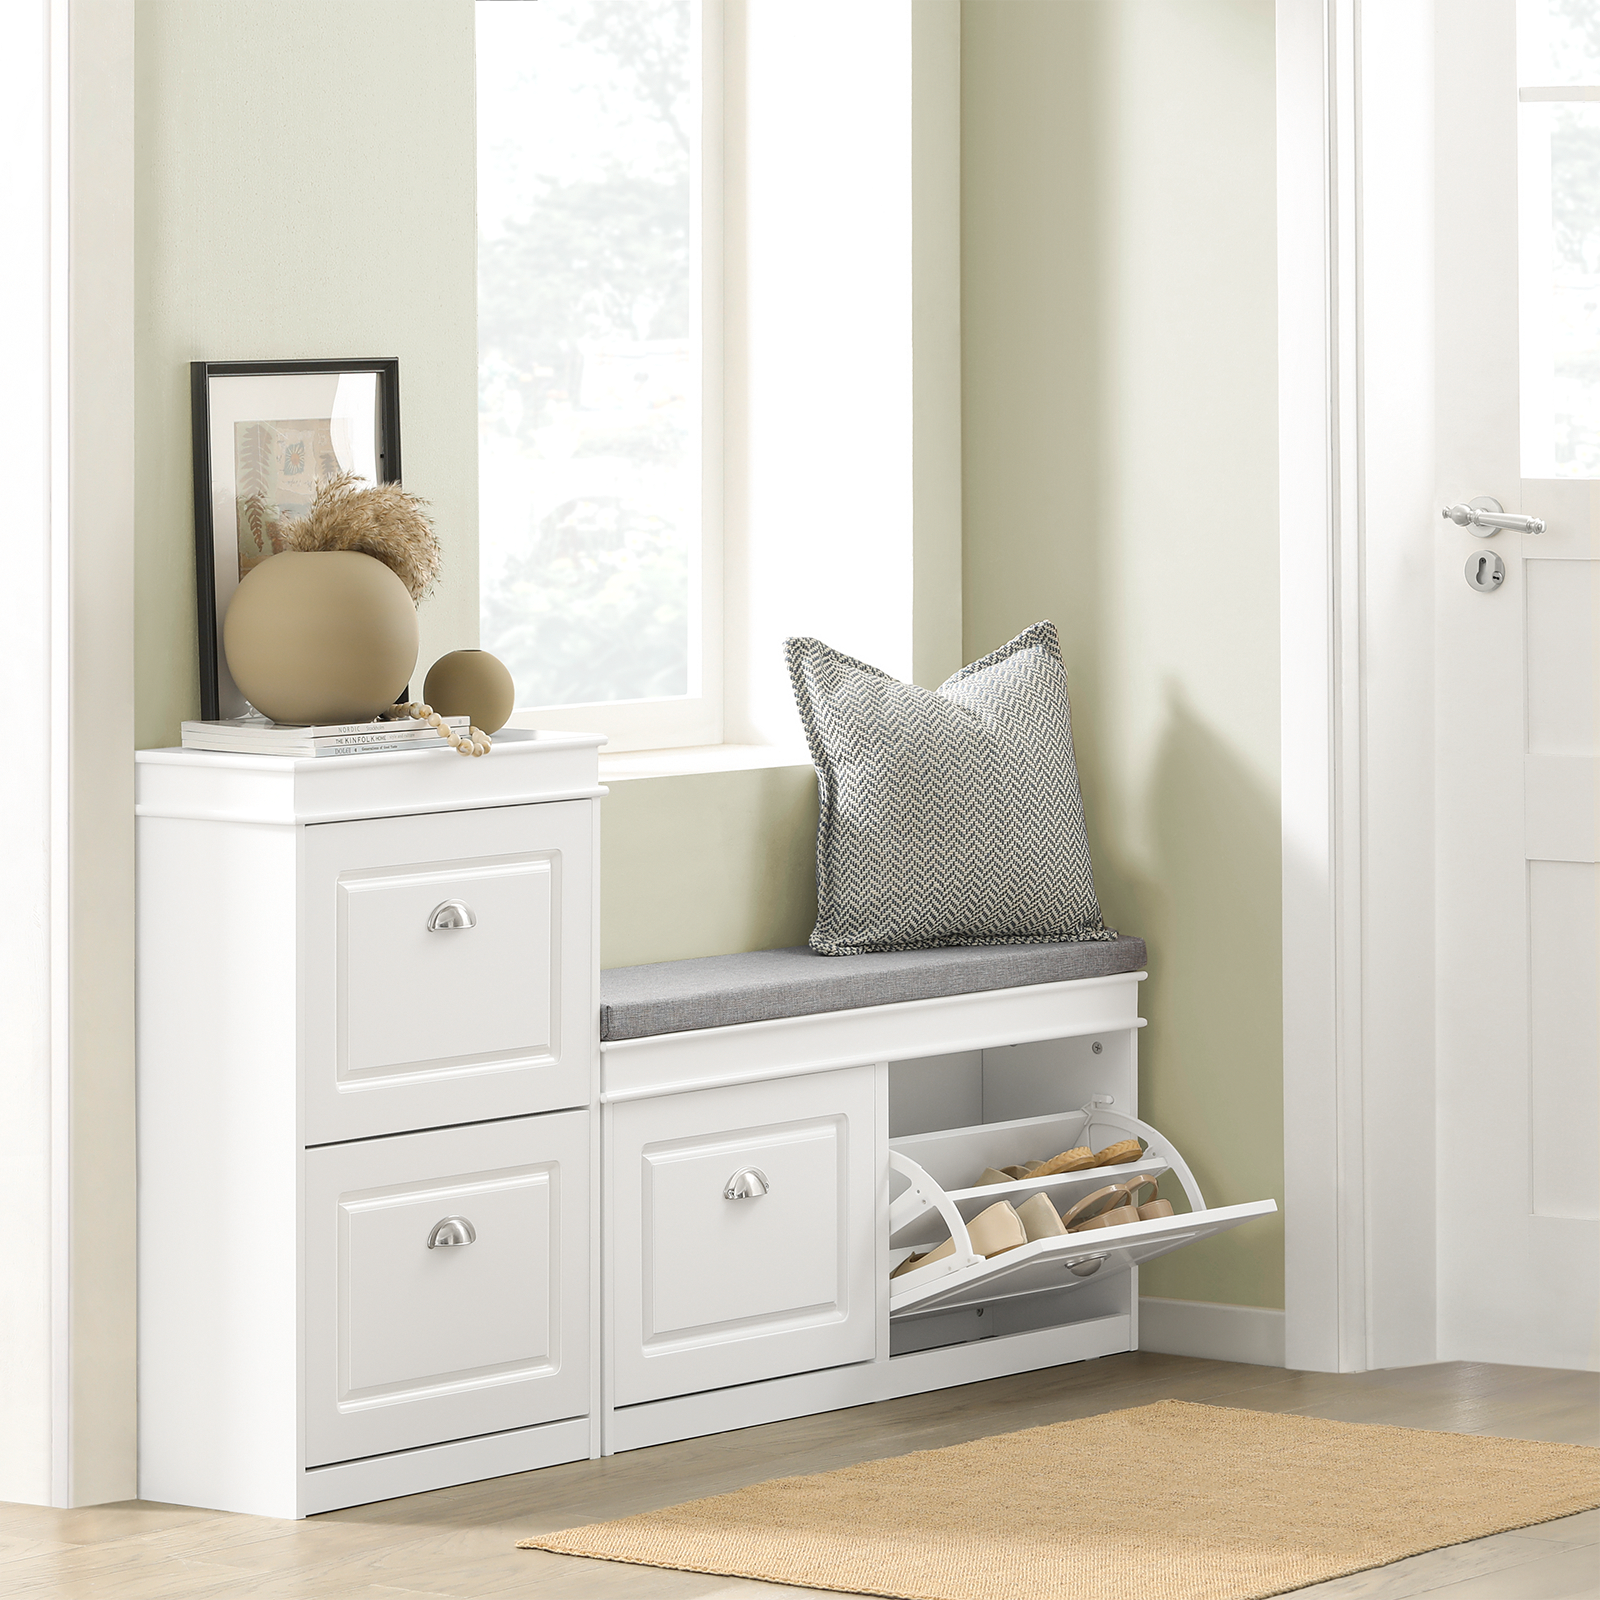 SoBuy FSR64-W,Hallway Shoe Bench,Shoe Cabinet with Flip-Drawer and Seat Cushion